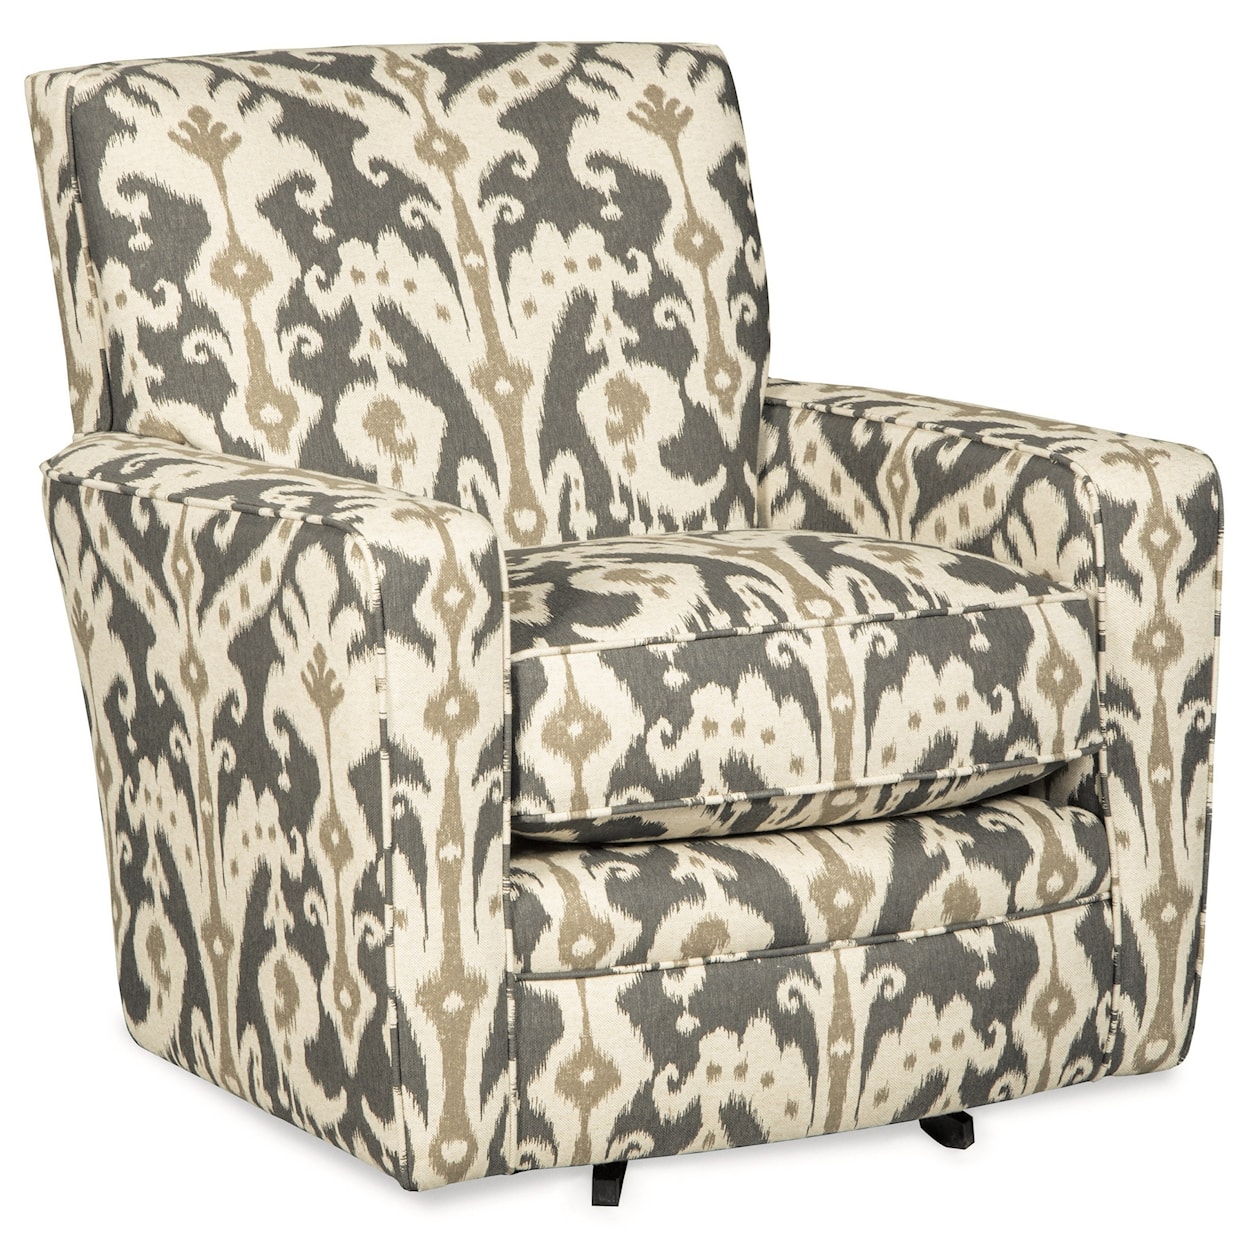 Craftmaster Swivel Chairs Upholstered Swivel Chair